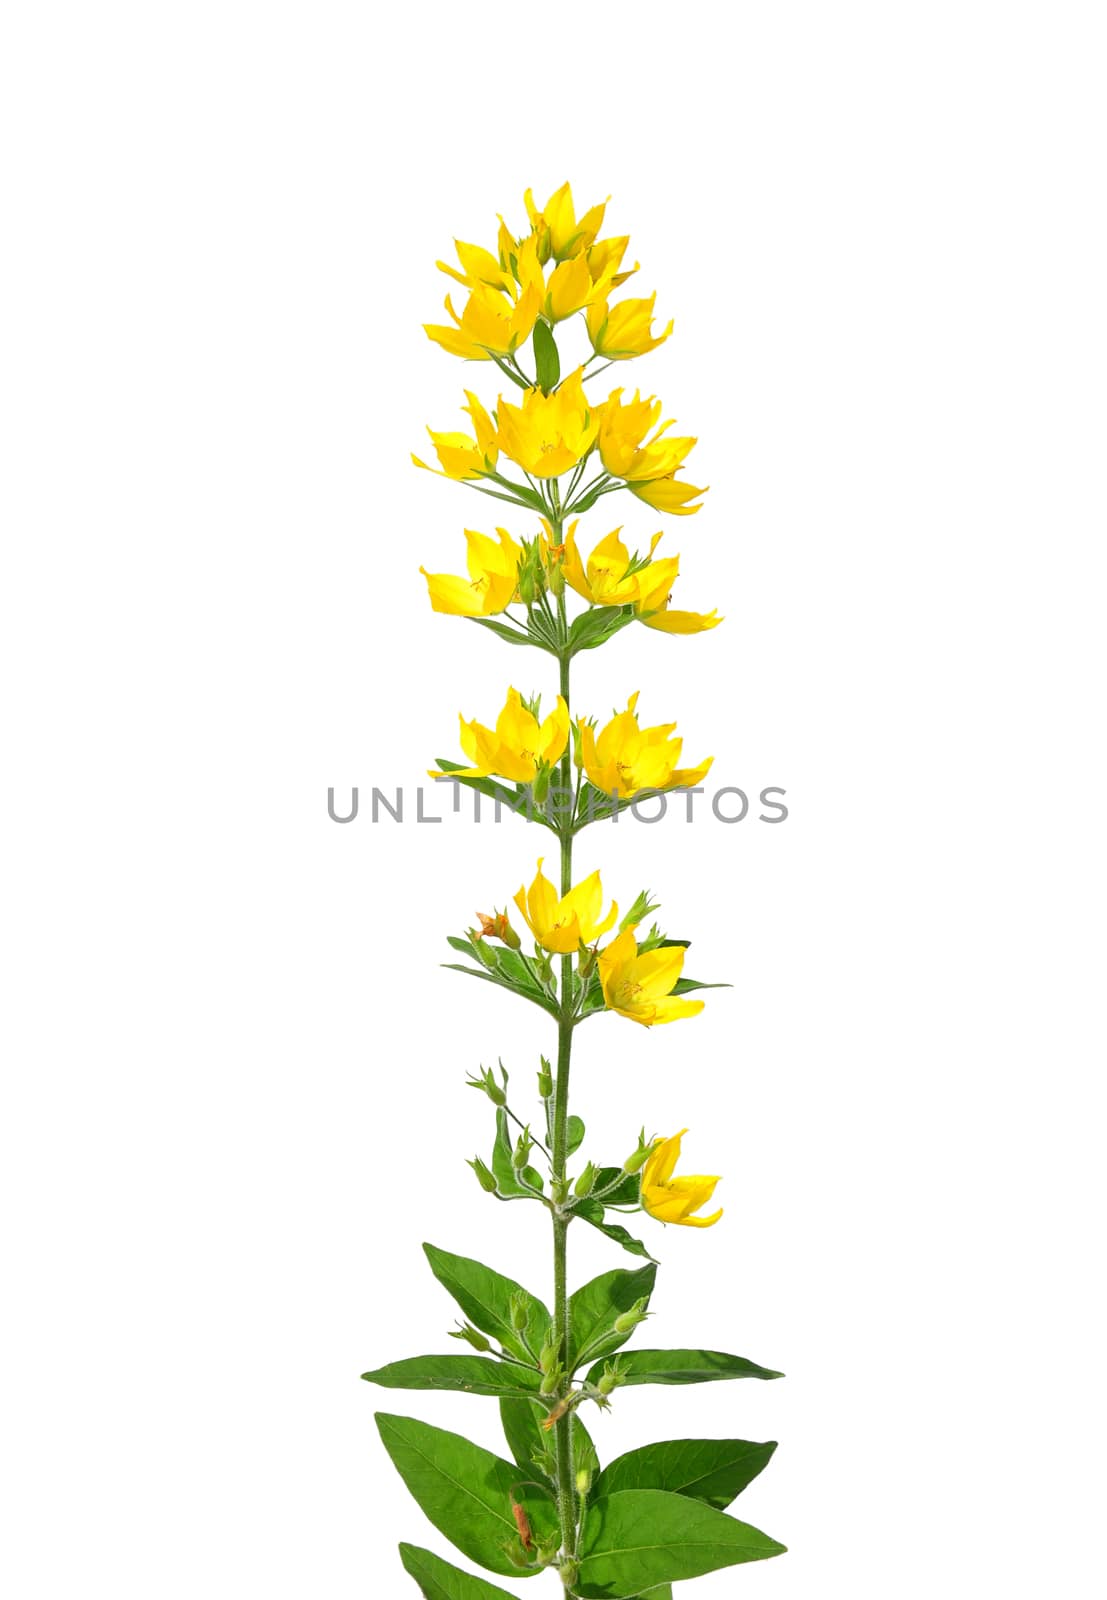 Spotted loosestrife (Lysimachia punctata) by rbiedermann